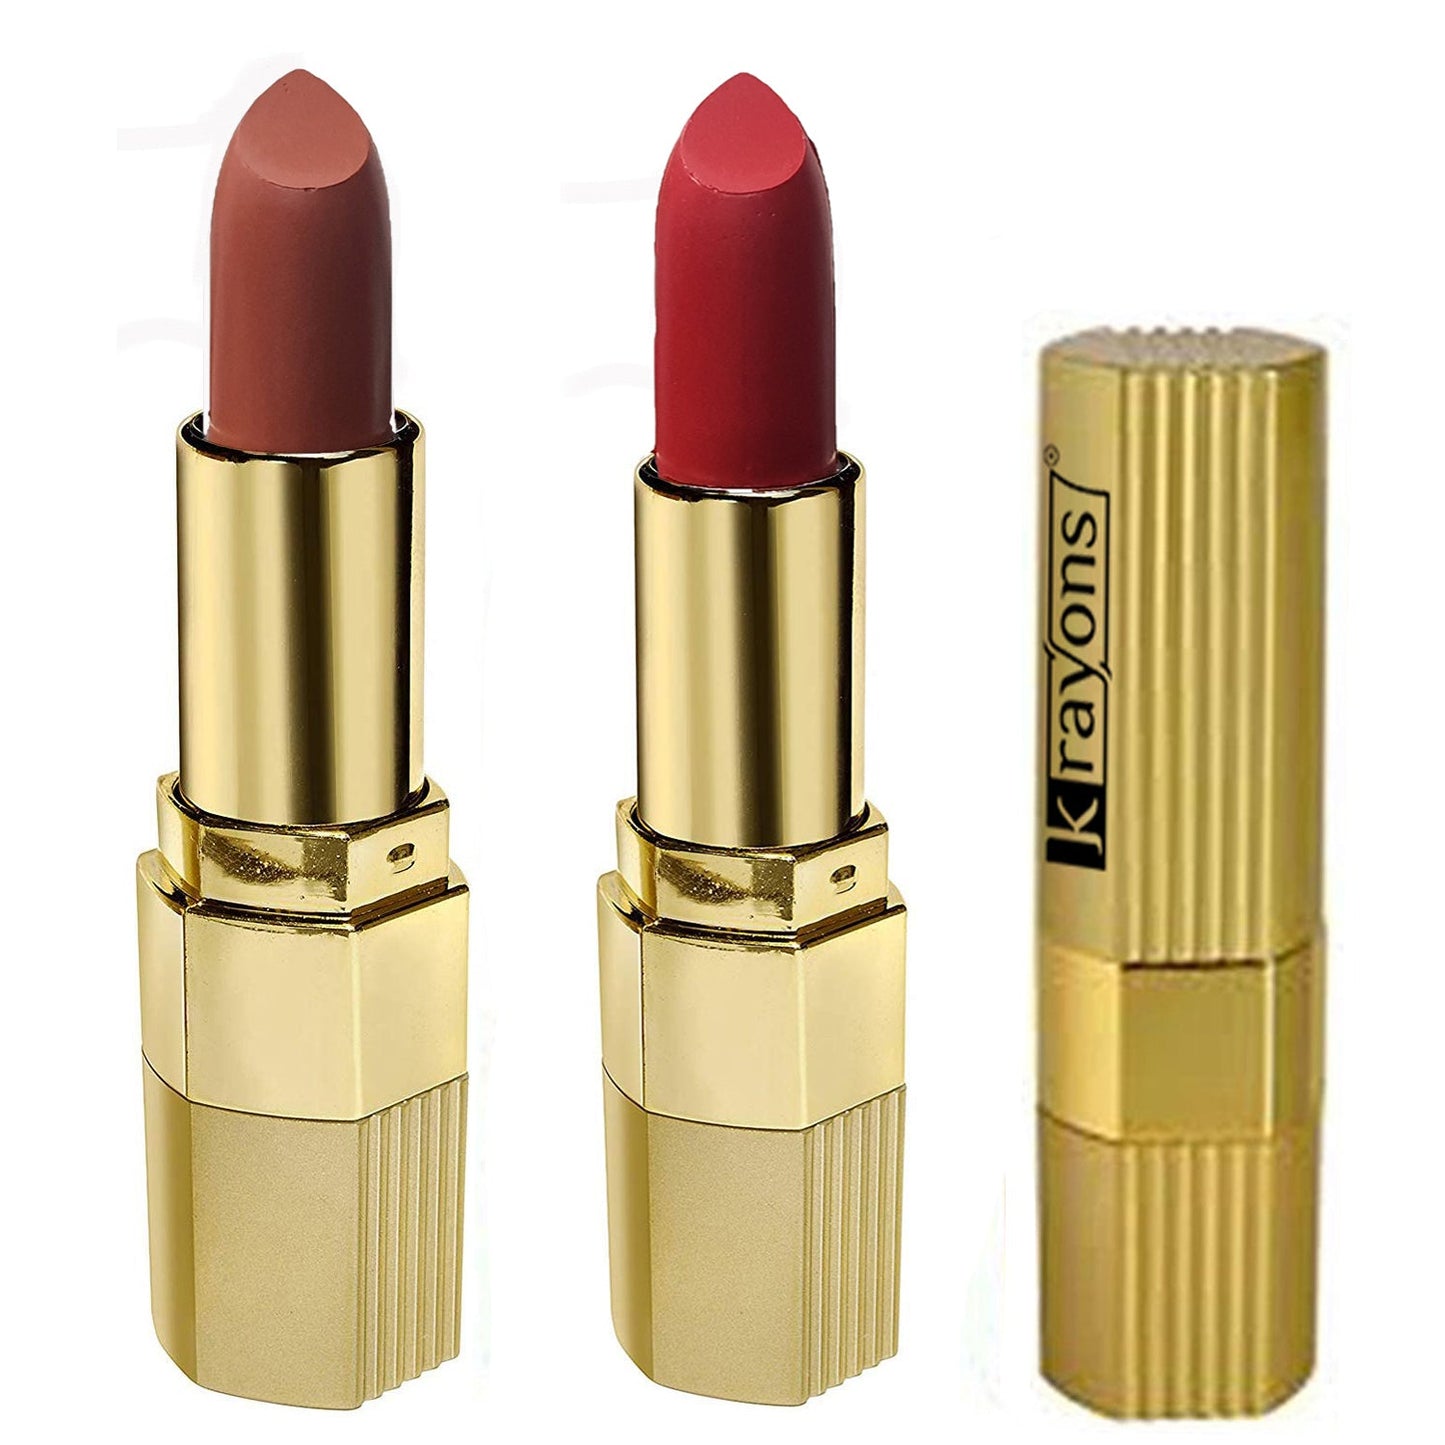 Krayons Desire Matte Lipstick, Highly Pigmented, Longlasting, 3.5g Each, Combo, Pack of 2 (Caramel Brown, Scarlet Red)